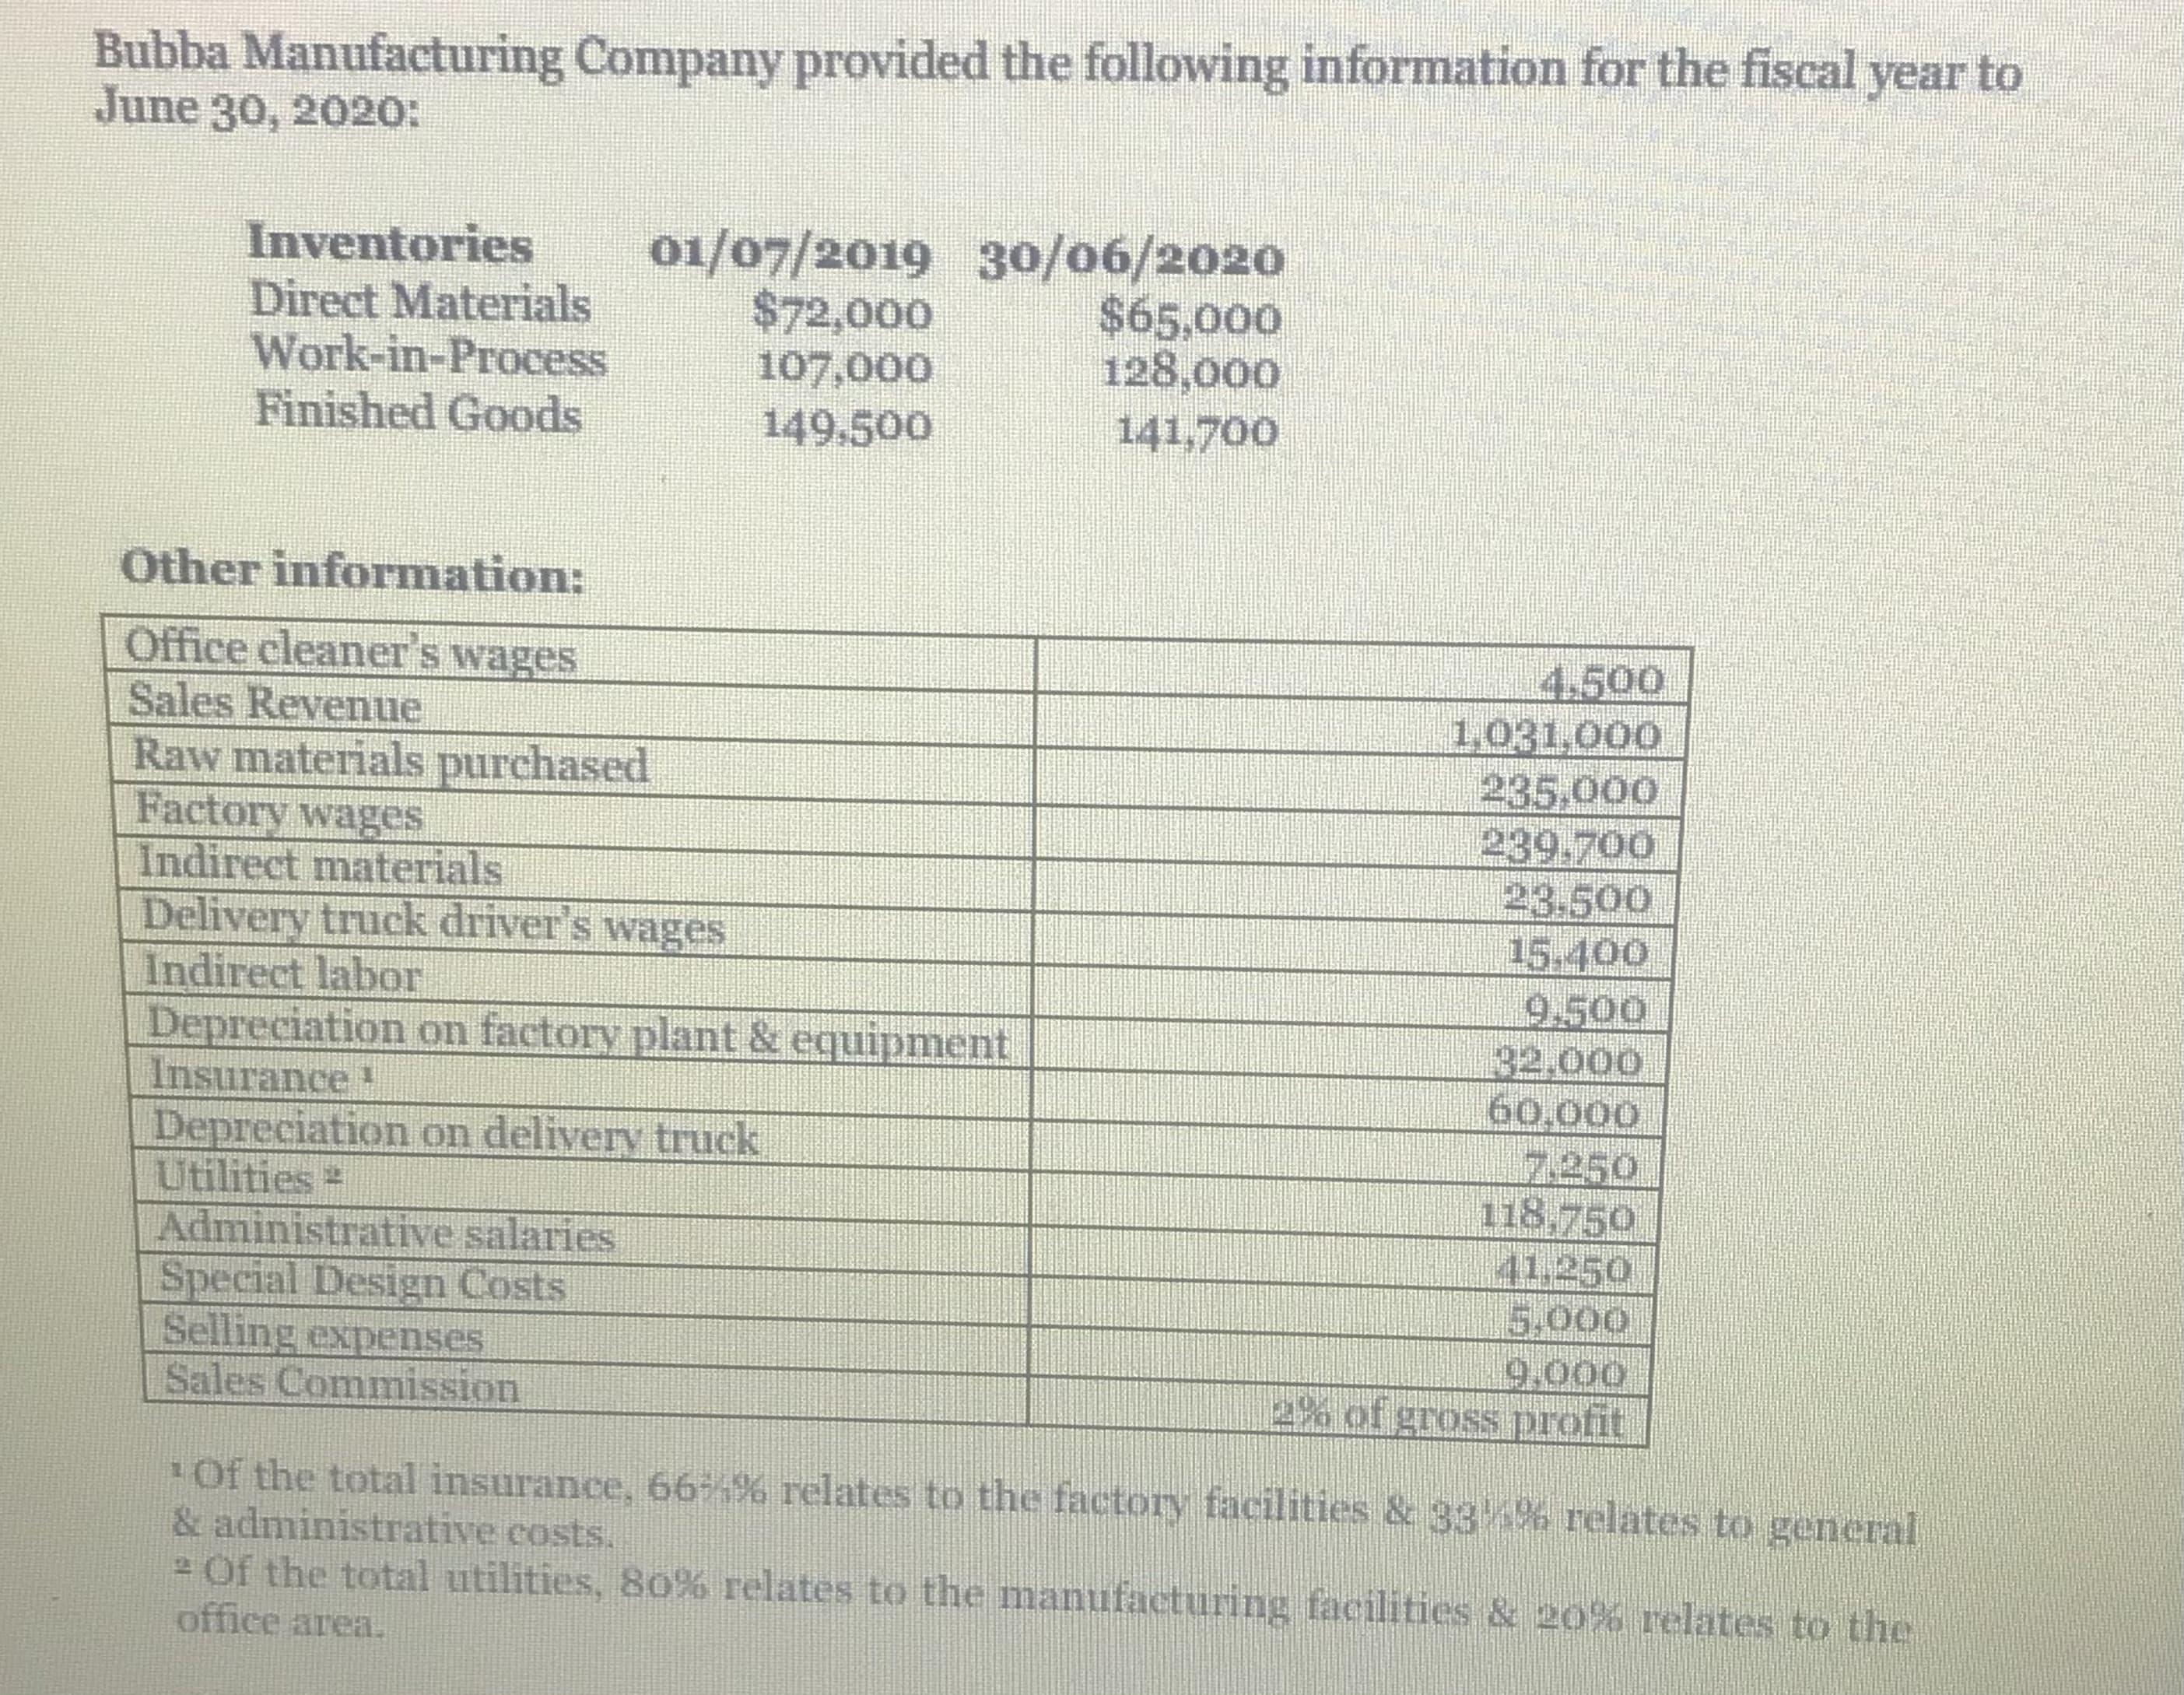 Bubba Manufacturing Company provided the following information for the fiscal year to
June 30, 2020:
Inventories
Direct Materials
Work-in-Process
Finished Goods
01/07/2019 3o/06/2020
$72,000
107,000
149,500
$65,000
128,000
141,700
Other information:
